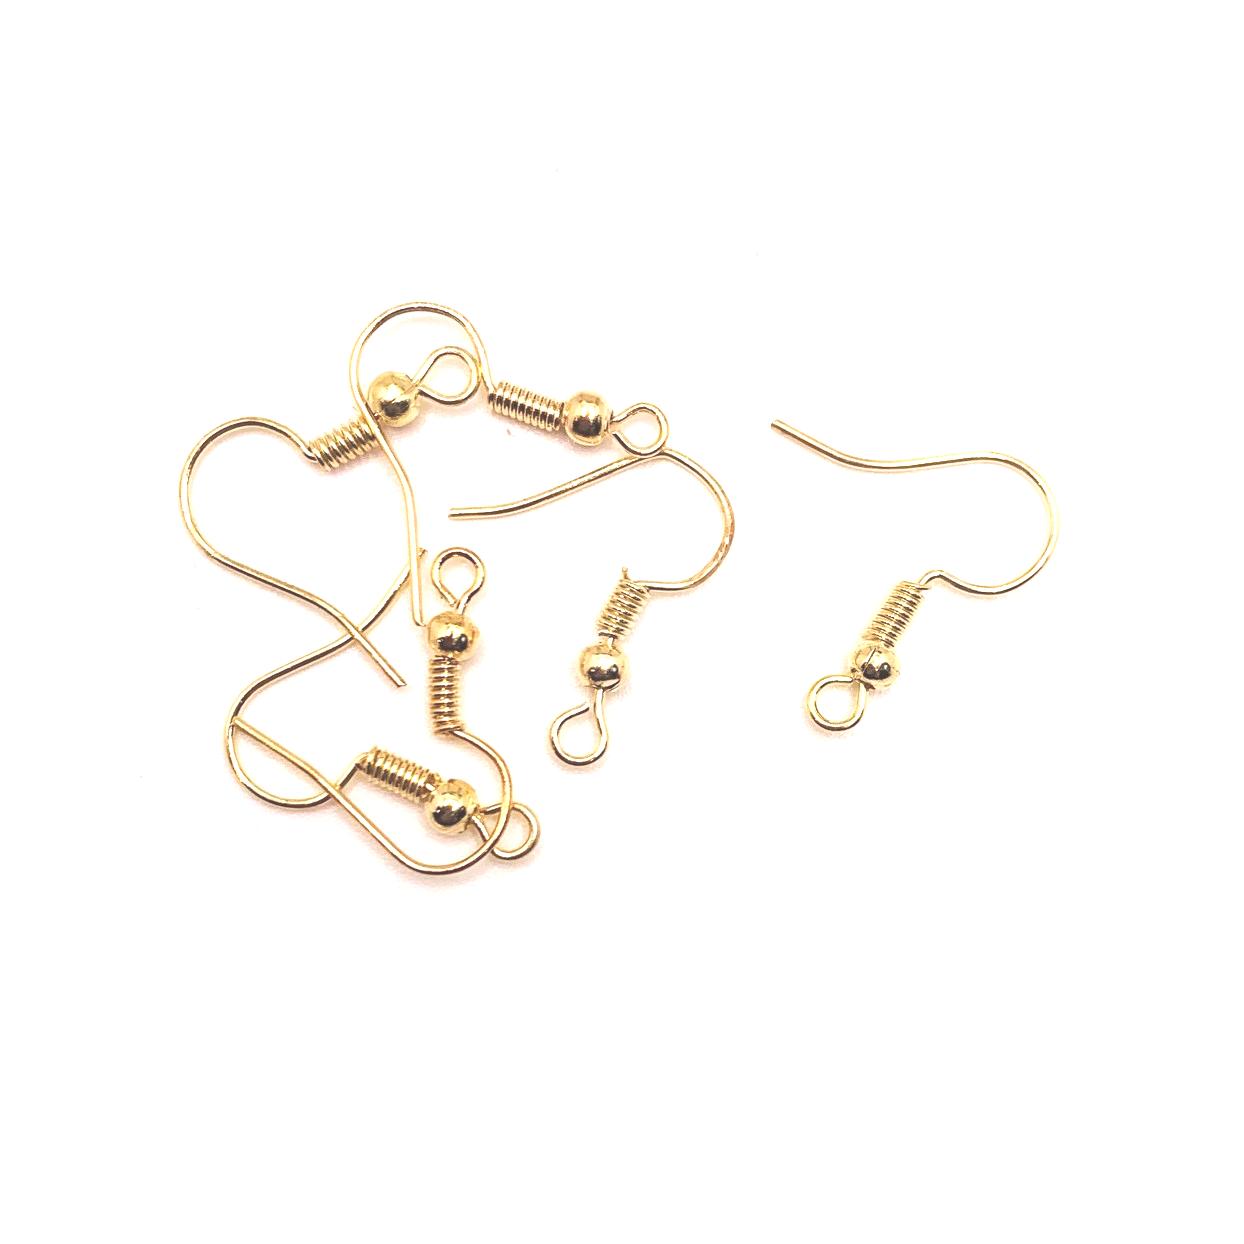 100 or 500 Pieces: KC Gold / Light Gold Plated Fish Hook Earring